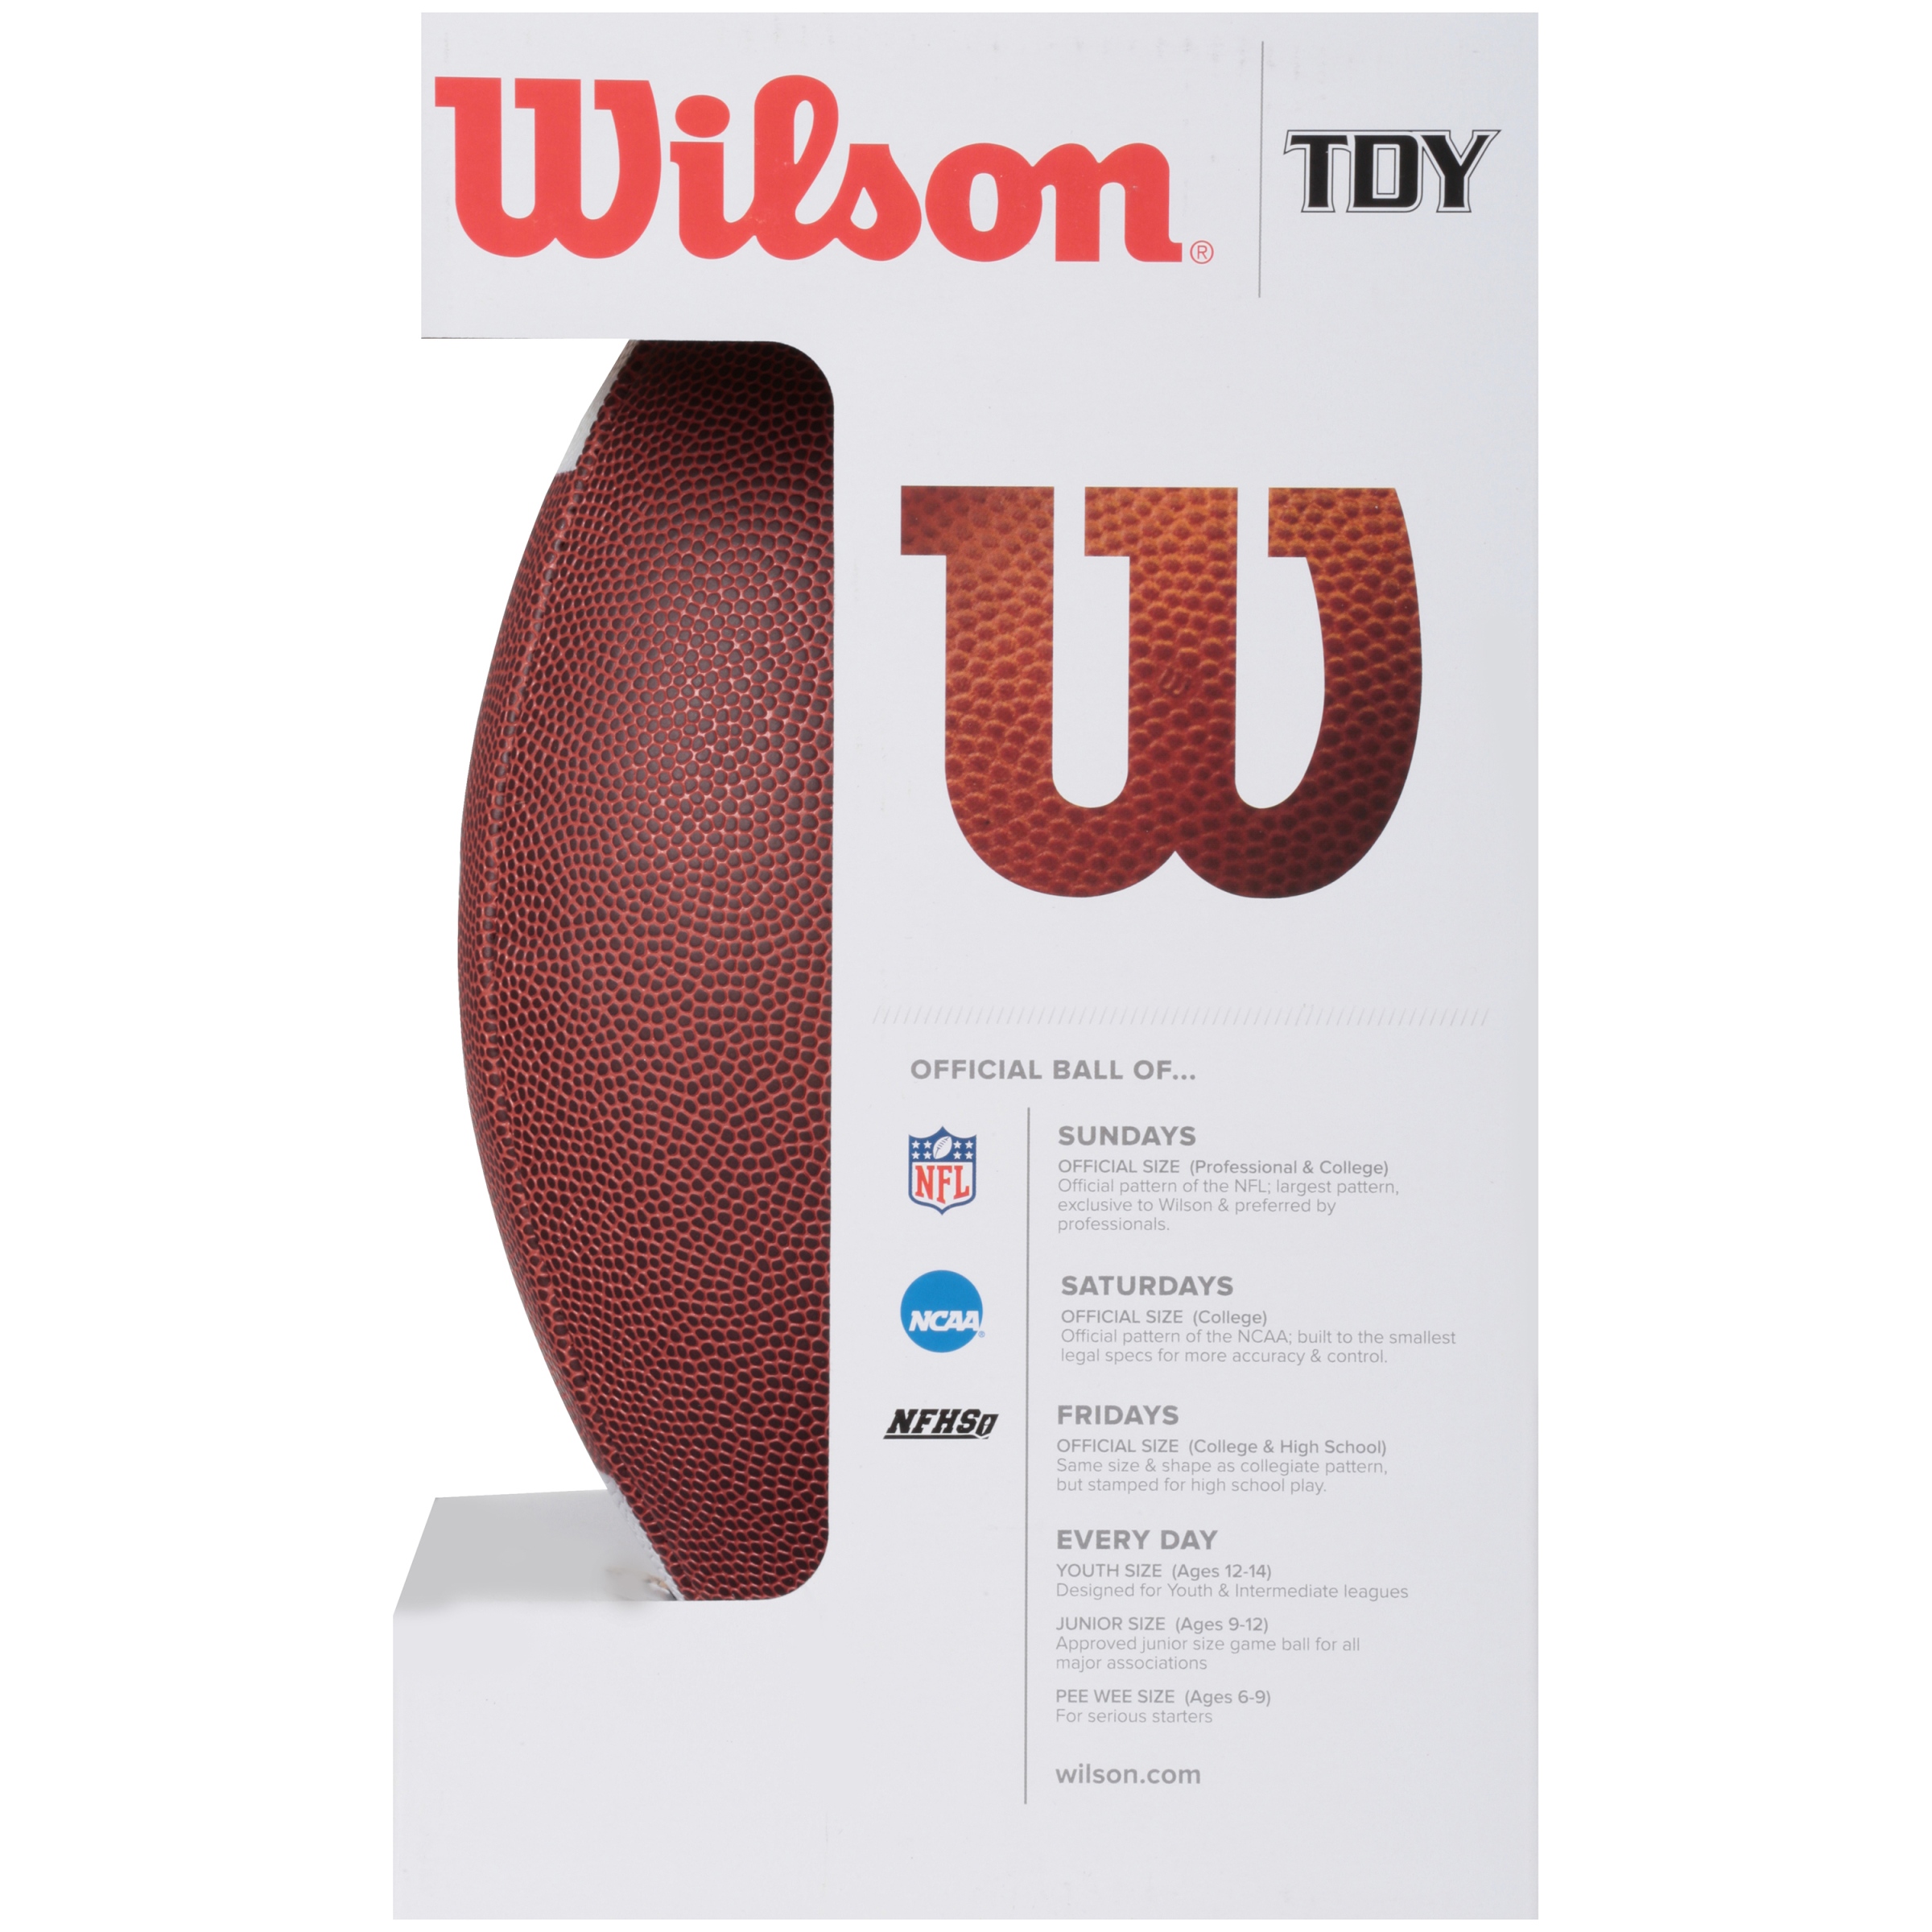 Wilson TDY Composite Football - Youth - image 4 of 5